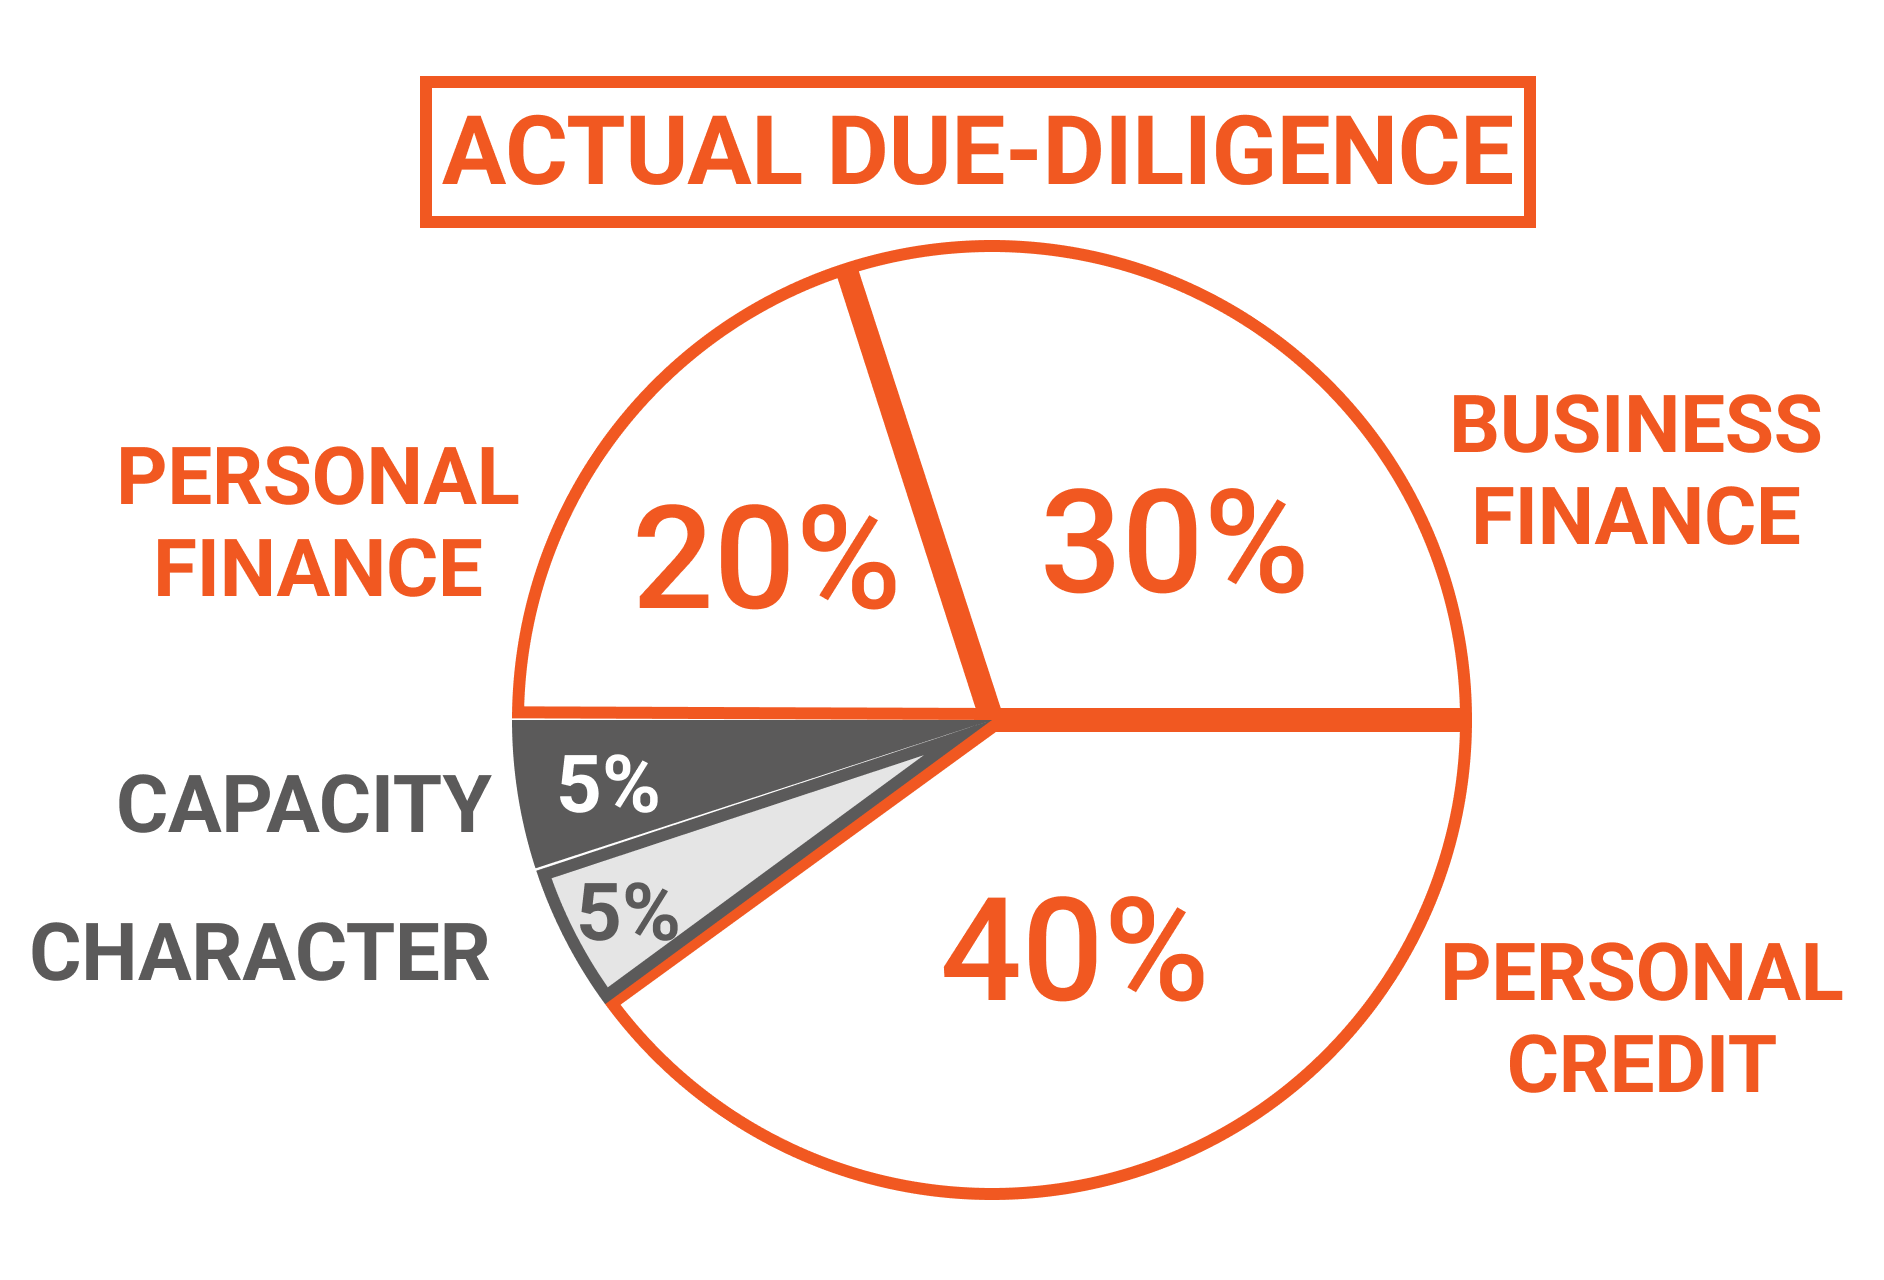 Reality of Performance and Payment Surety Bonding Due Diligence is largely based upon capital and financing both of which are limited in availability for small and minority businesses